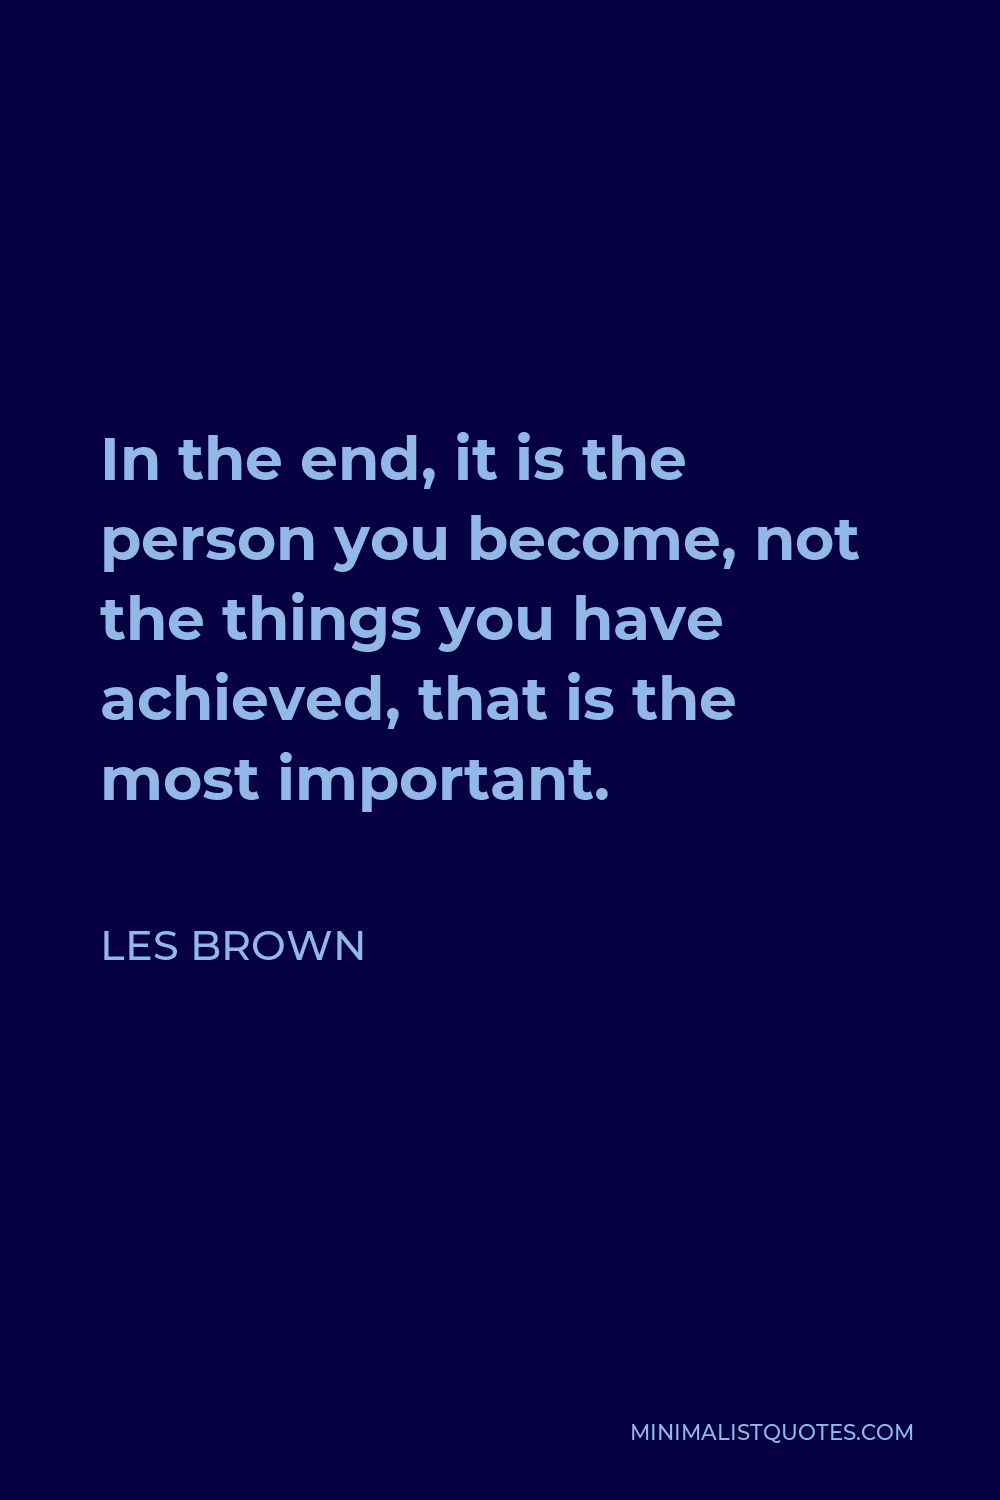 Les Brown Quote - In the end, it is the person you become, not the things you have achieved, that is the most important.